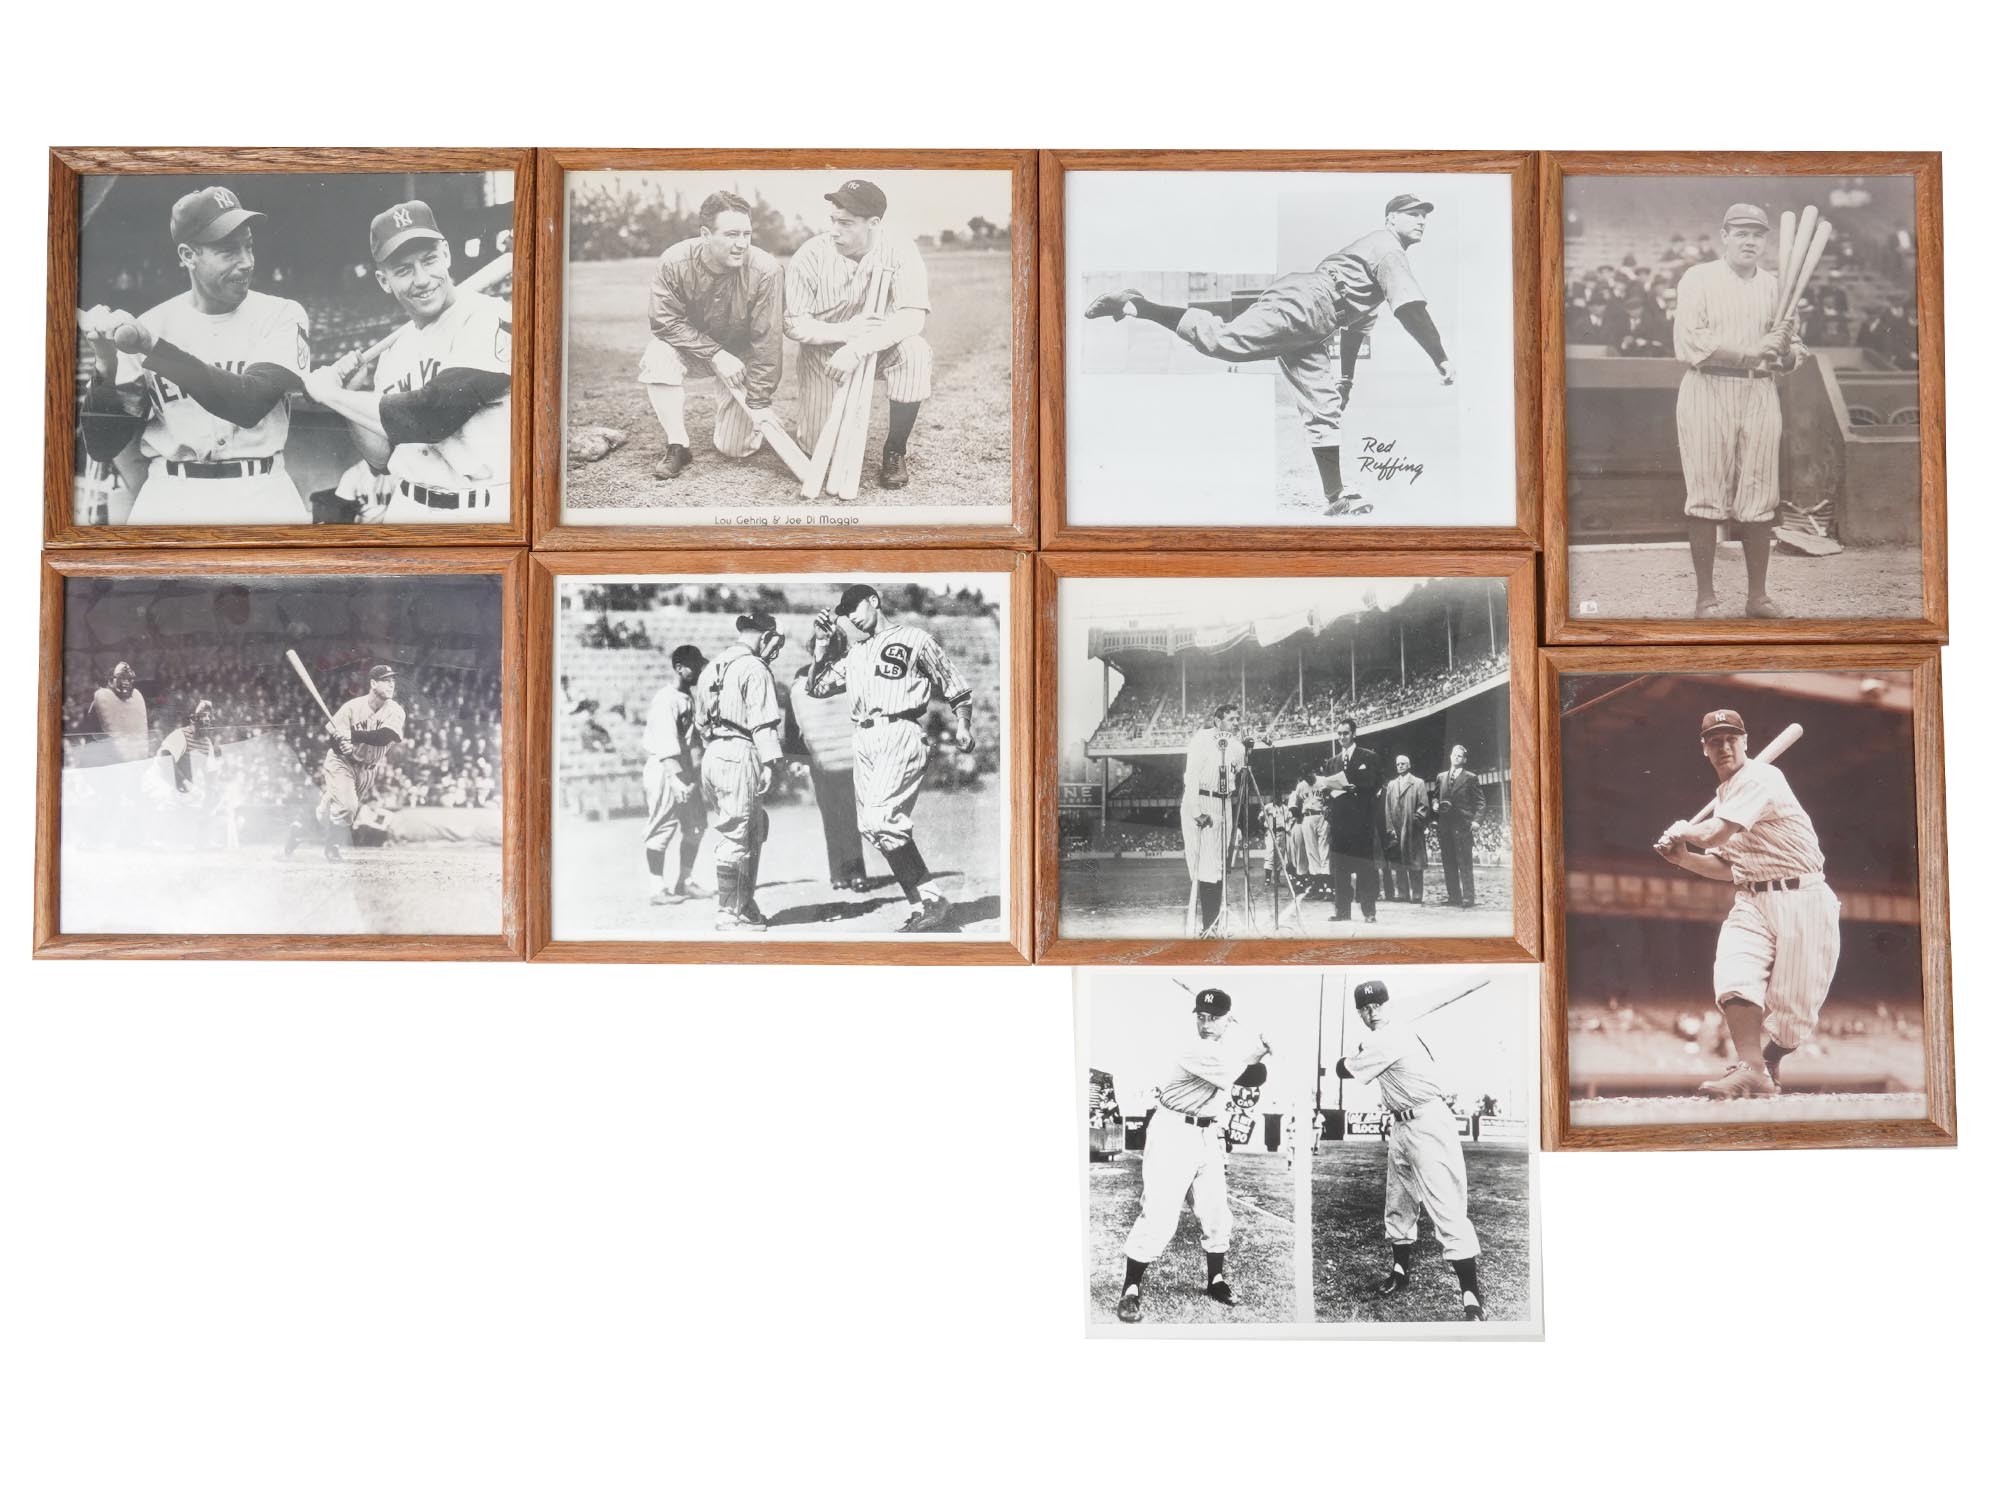 NY YANKEES PLAYERS DOCUMENTARY PHOTO COLLECTION PIC-0